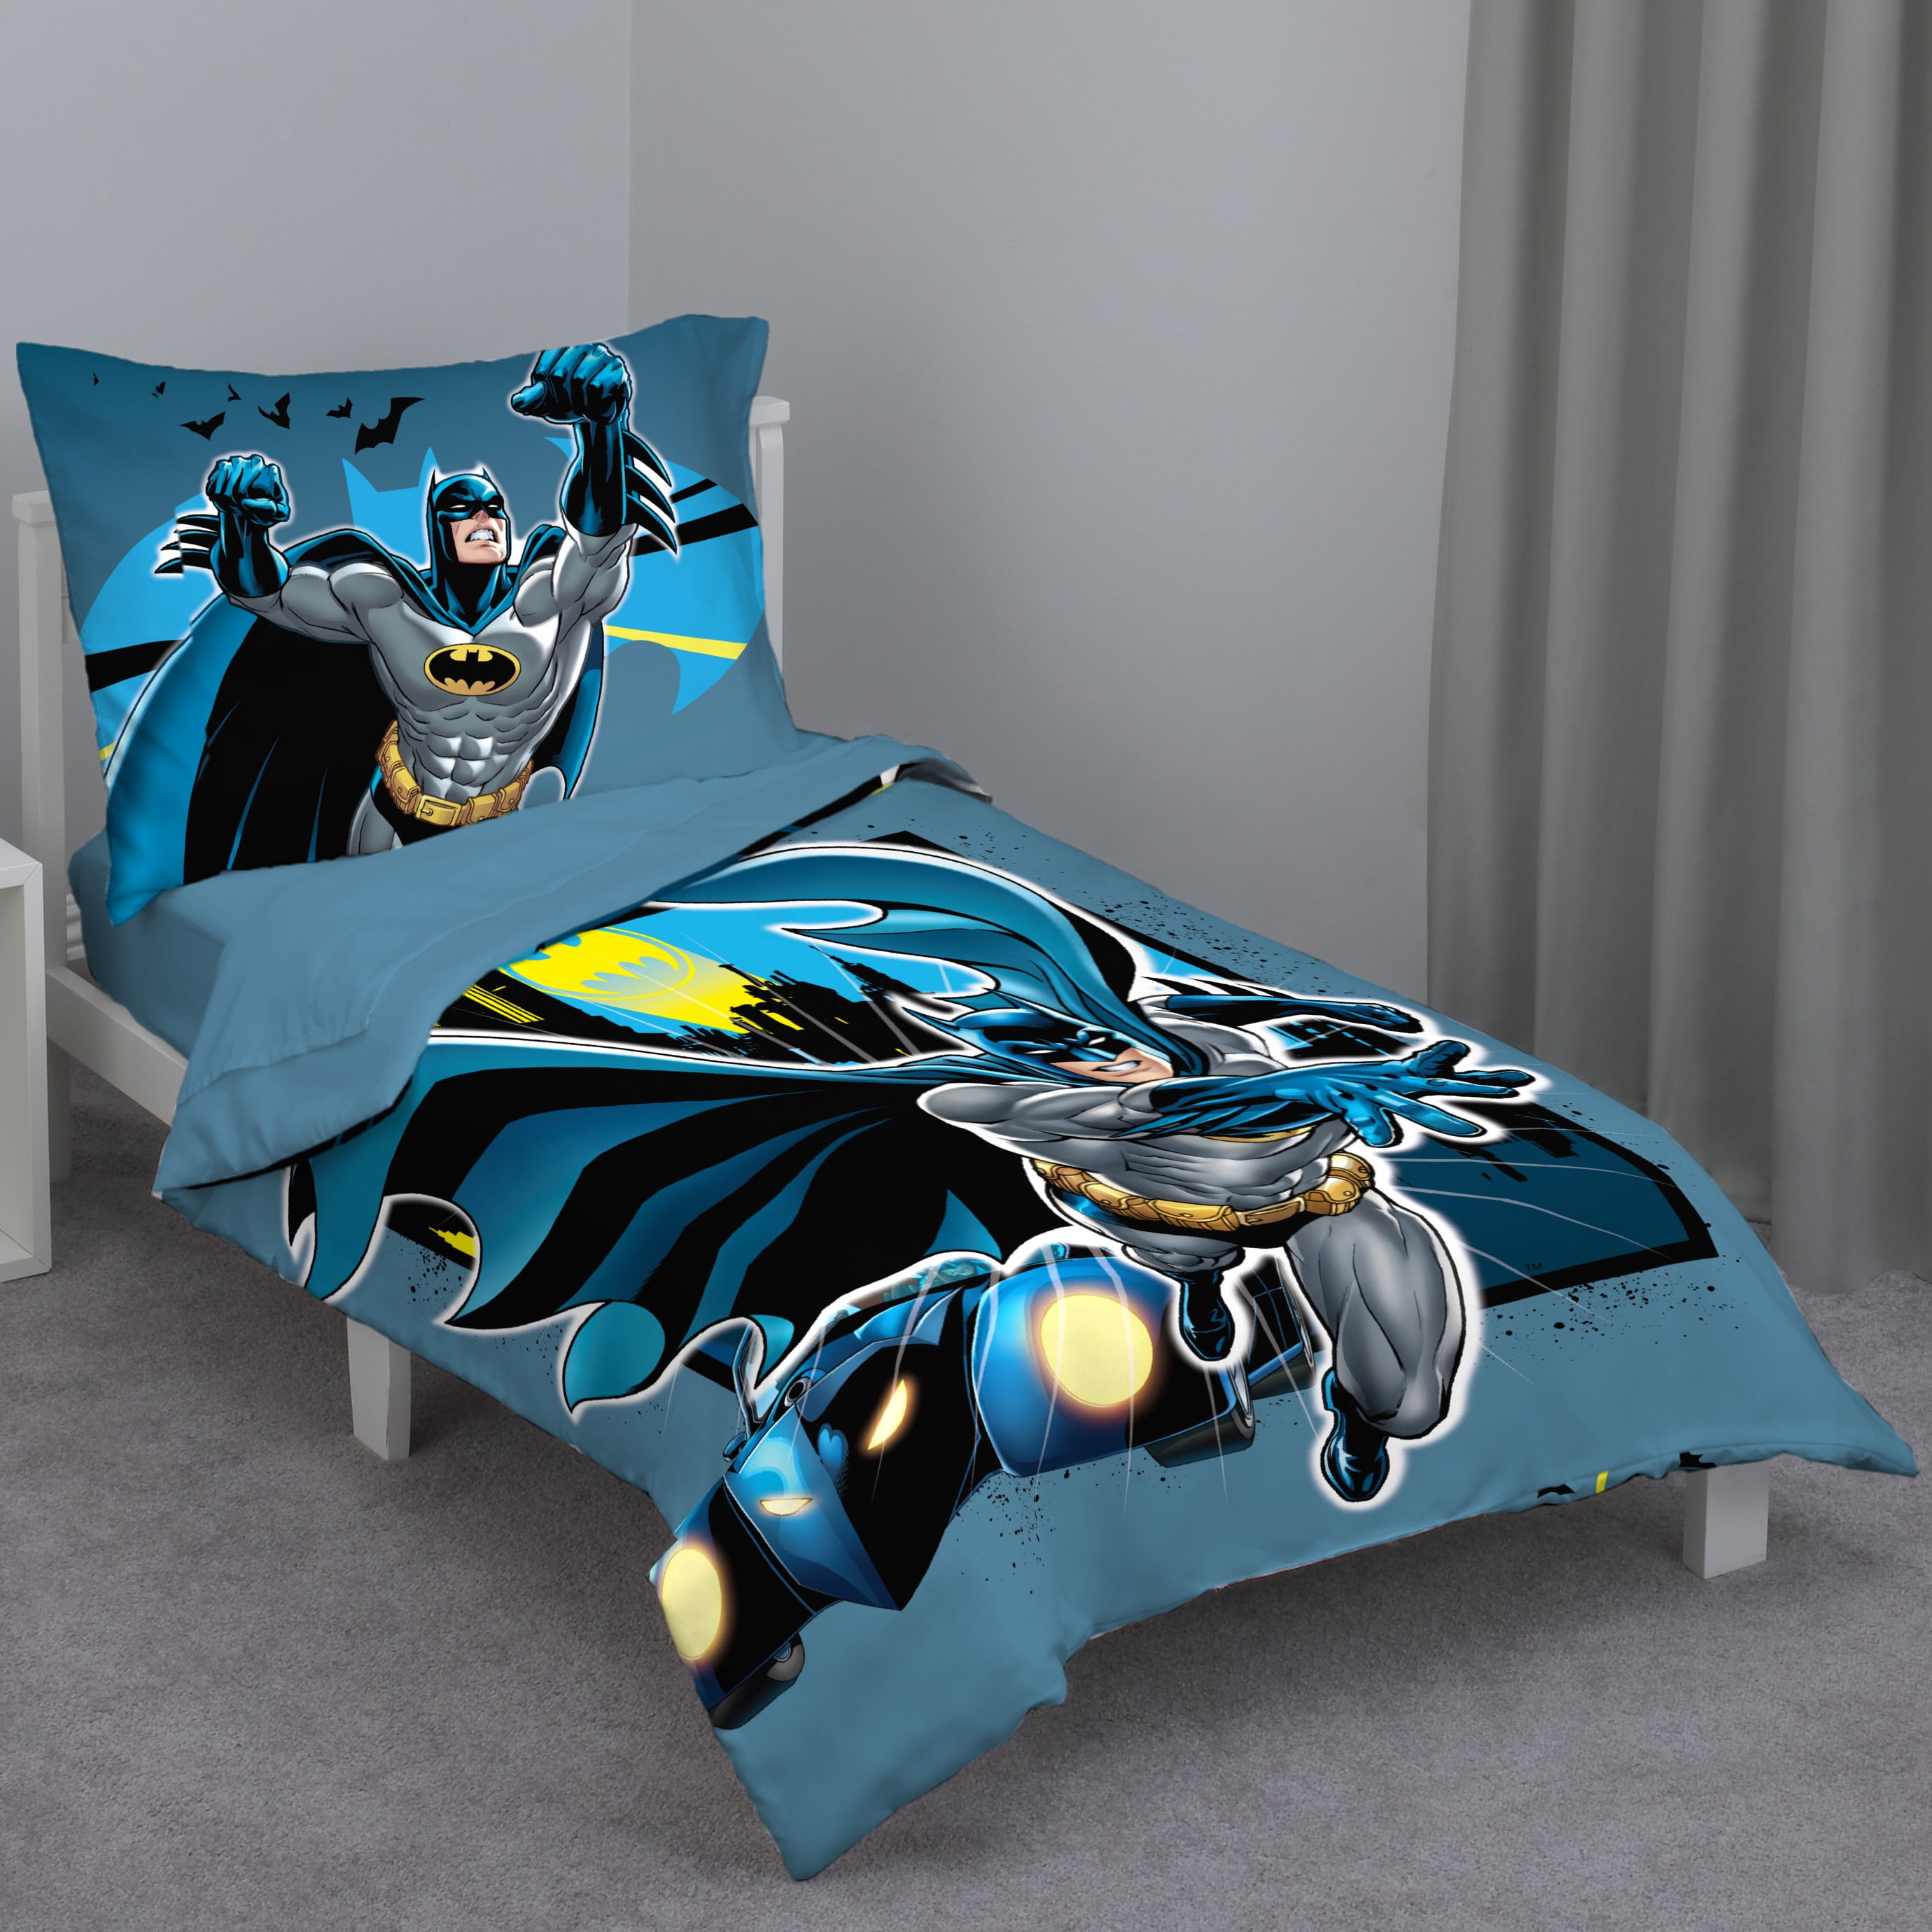 Batman Twin Size Comforter Set 4 Piece Bed in a Bag Sheets Kid's Boy's Bedding 